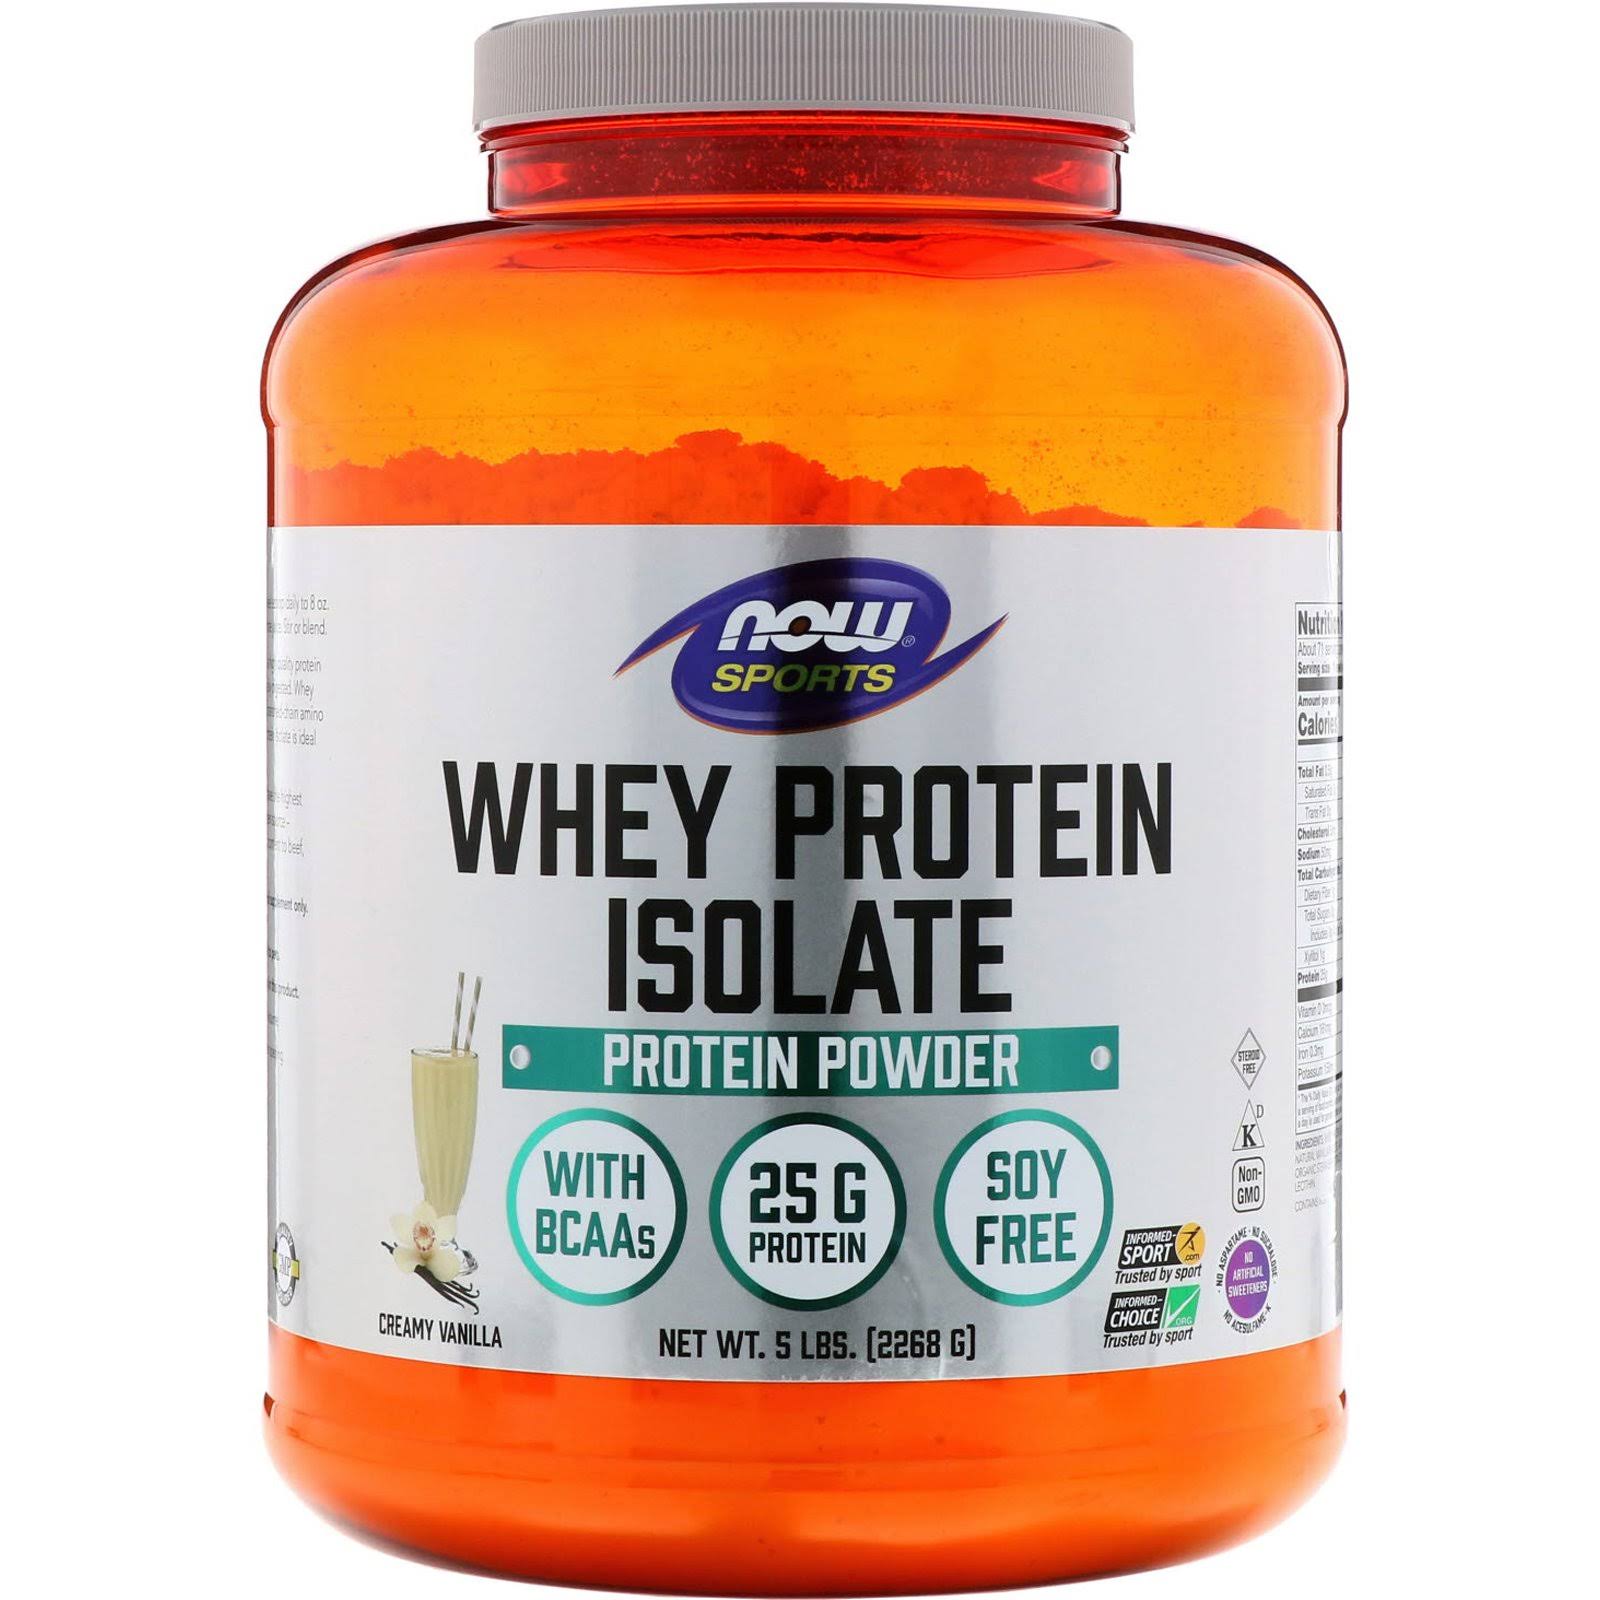 Now Whey Protein Isolate Dietary Supplement - Natural Natural Vanilla, 5lbs